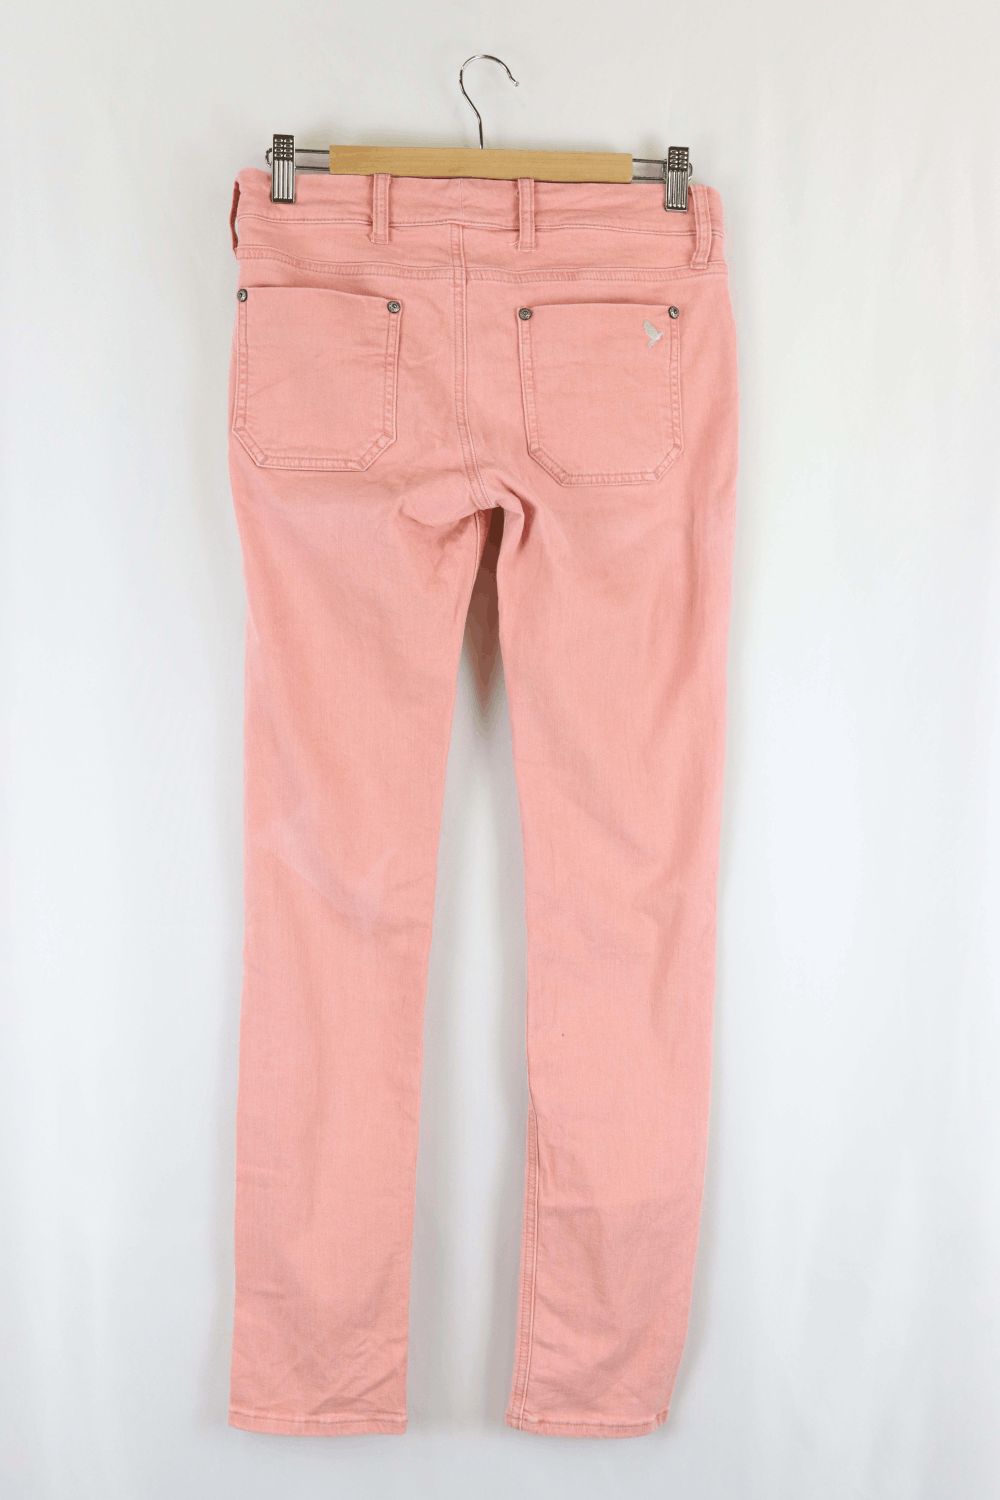 MIH Jeans Pink 28 (8)